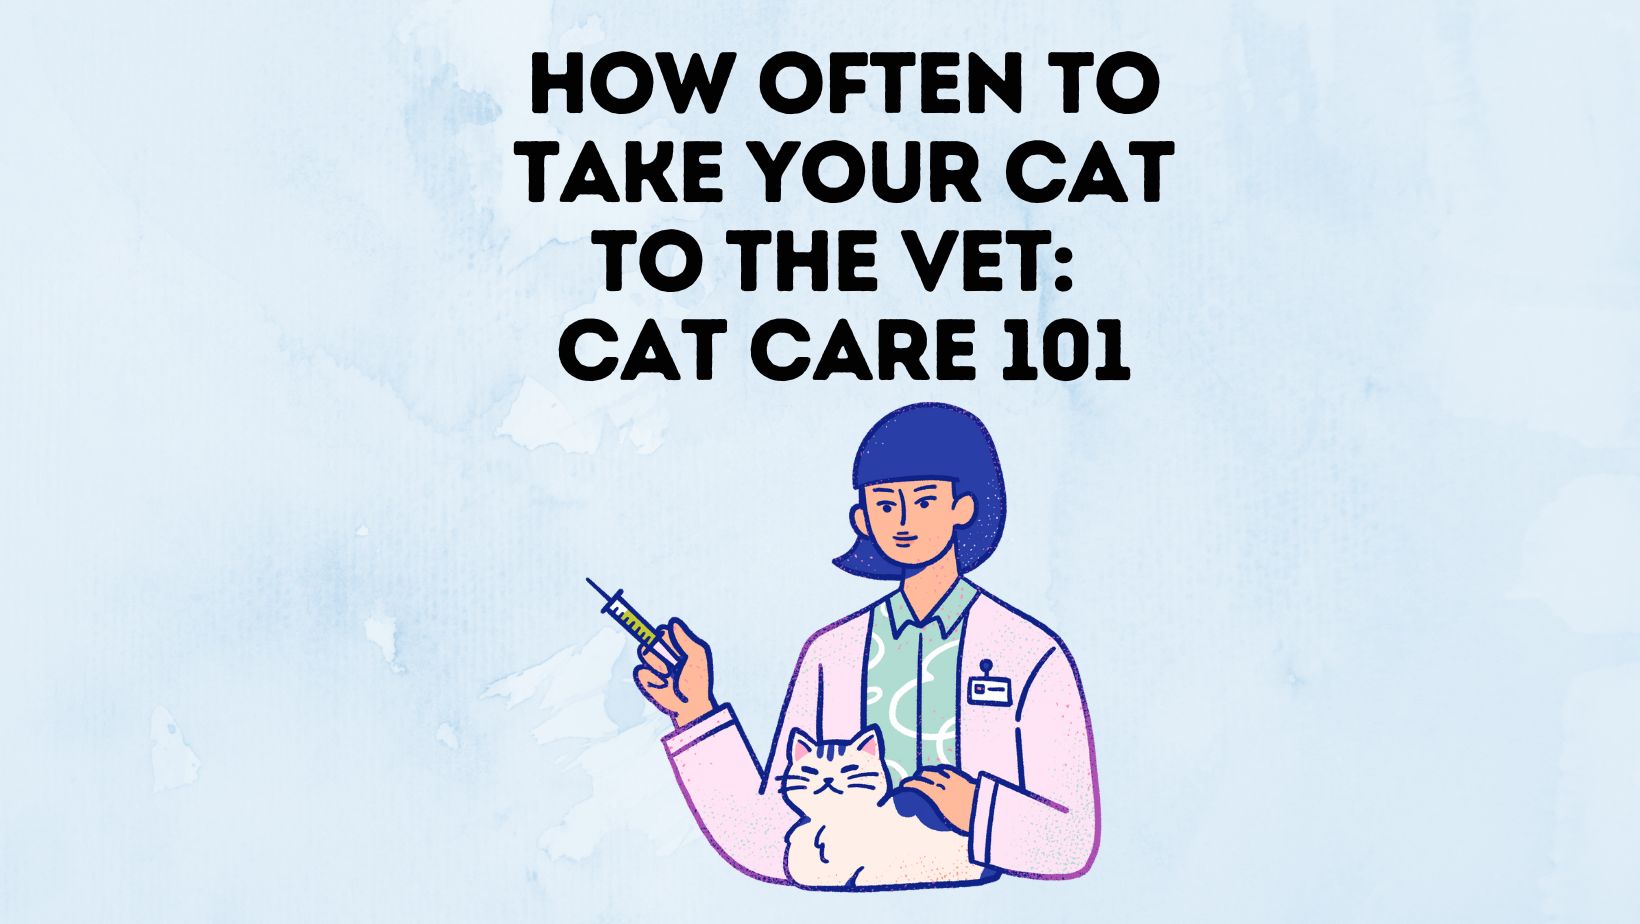 How Often To Take Your Cat to The Vet